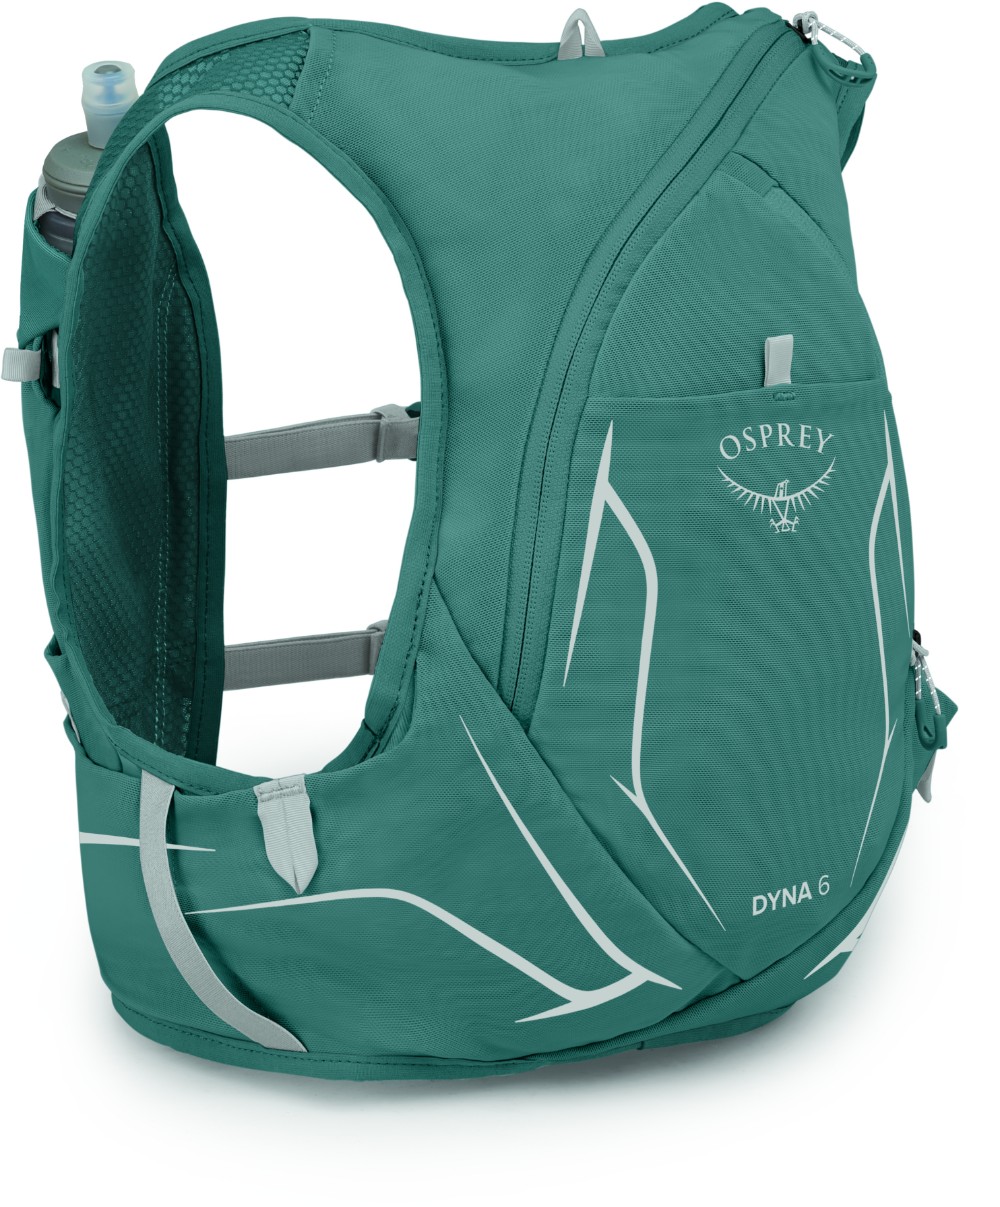 Dyna 6 Womens Hydration Pack with Flasks image 1